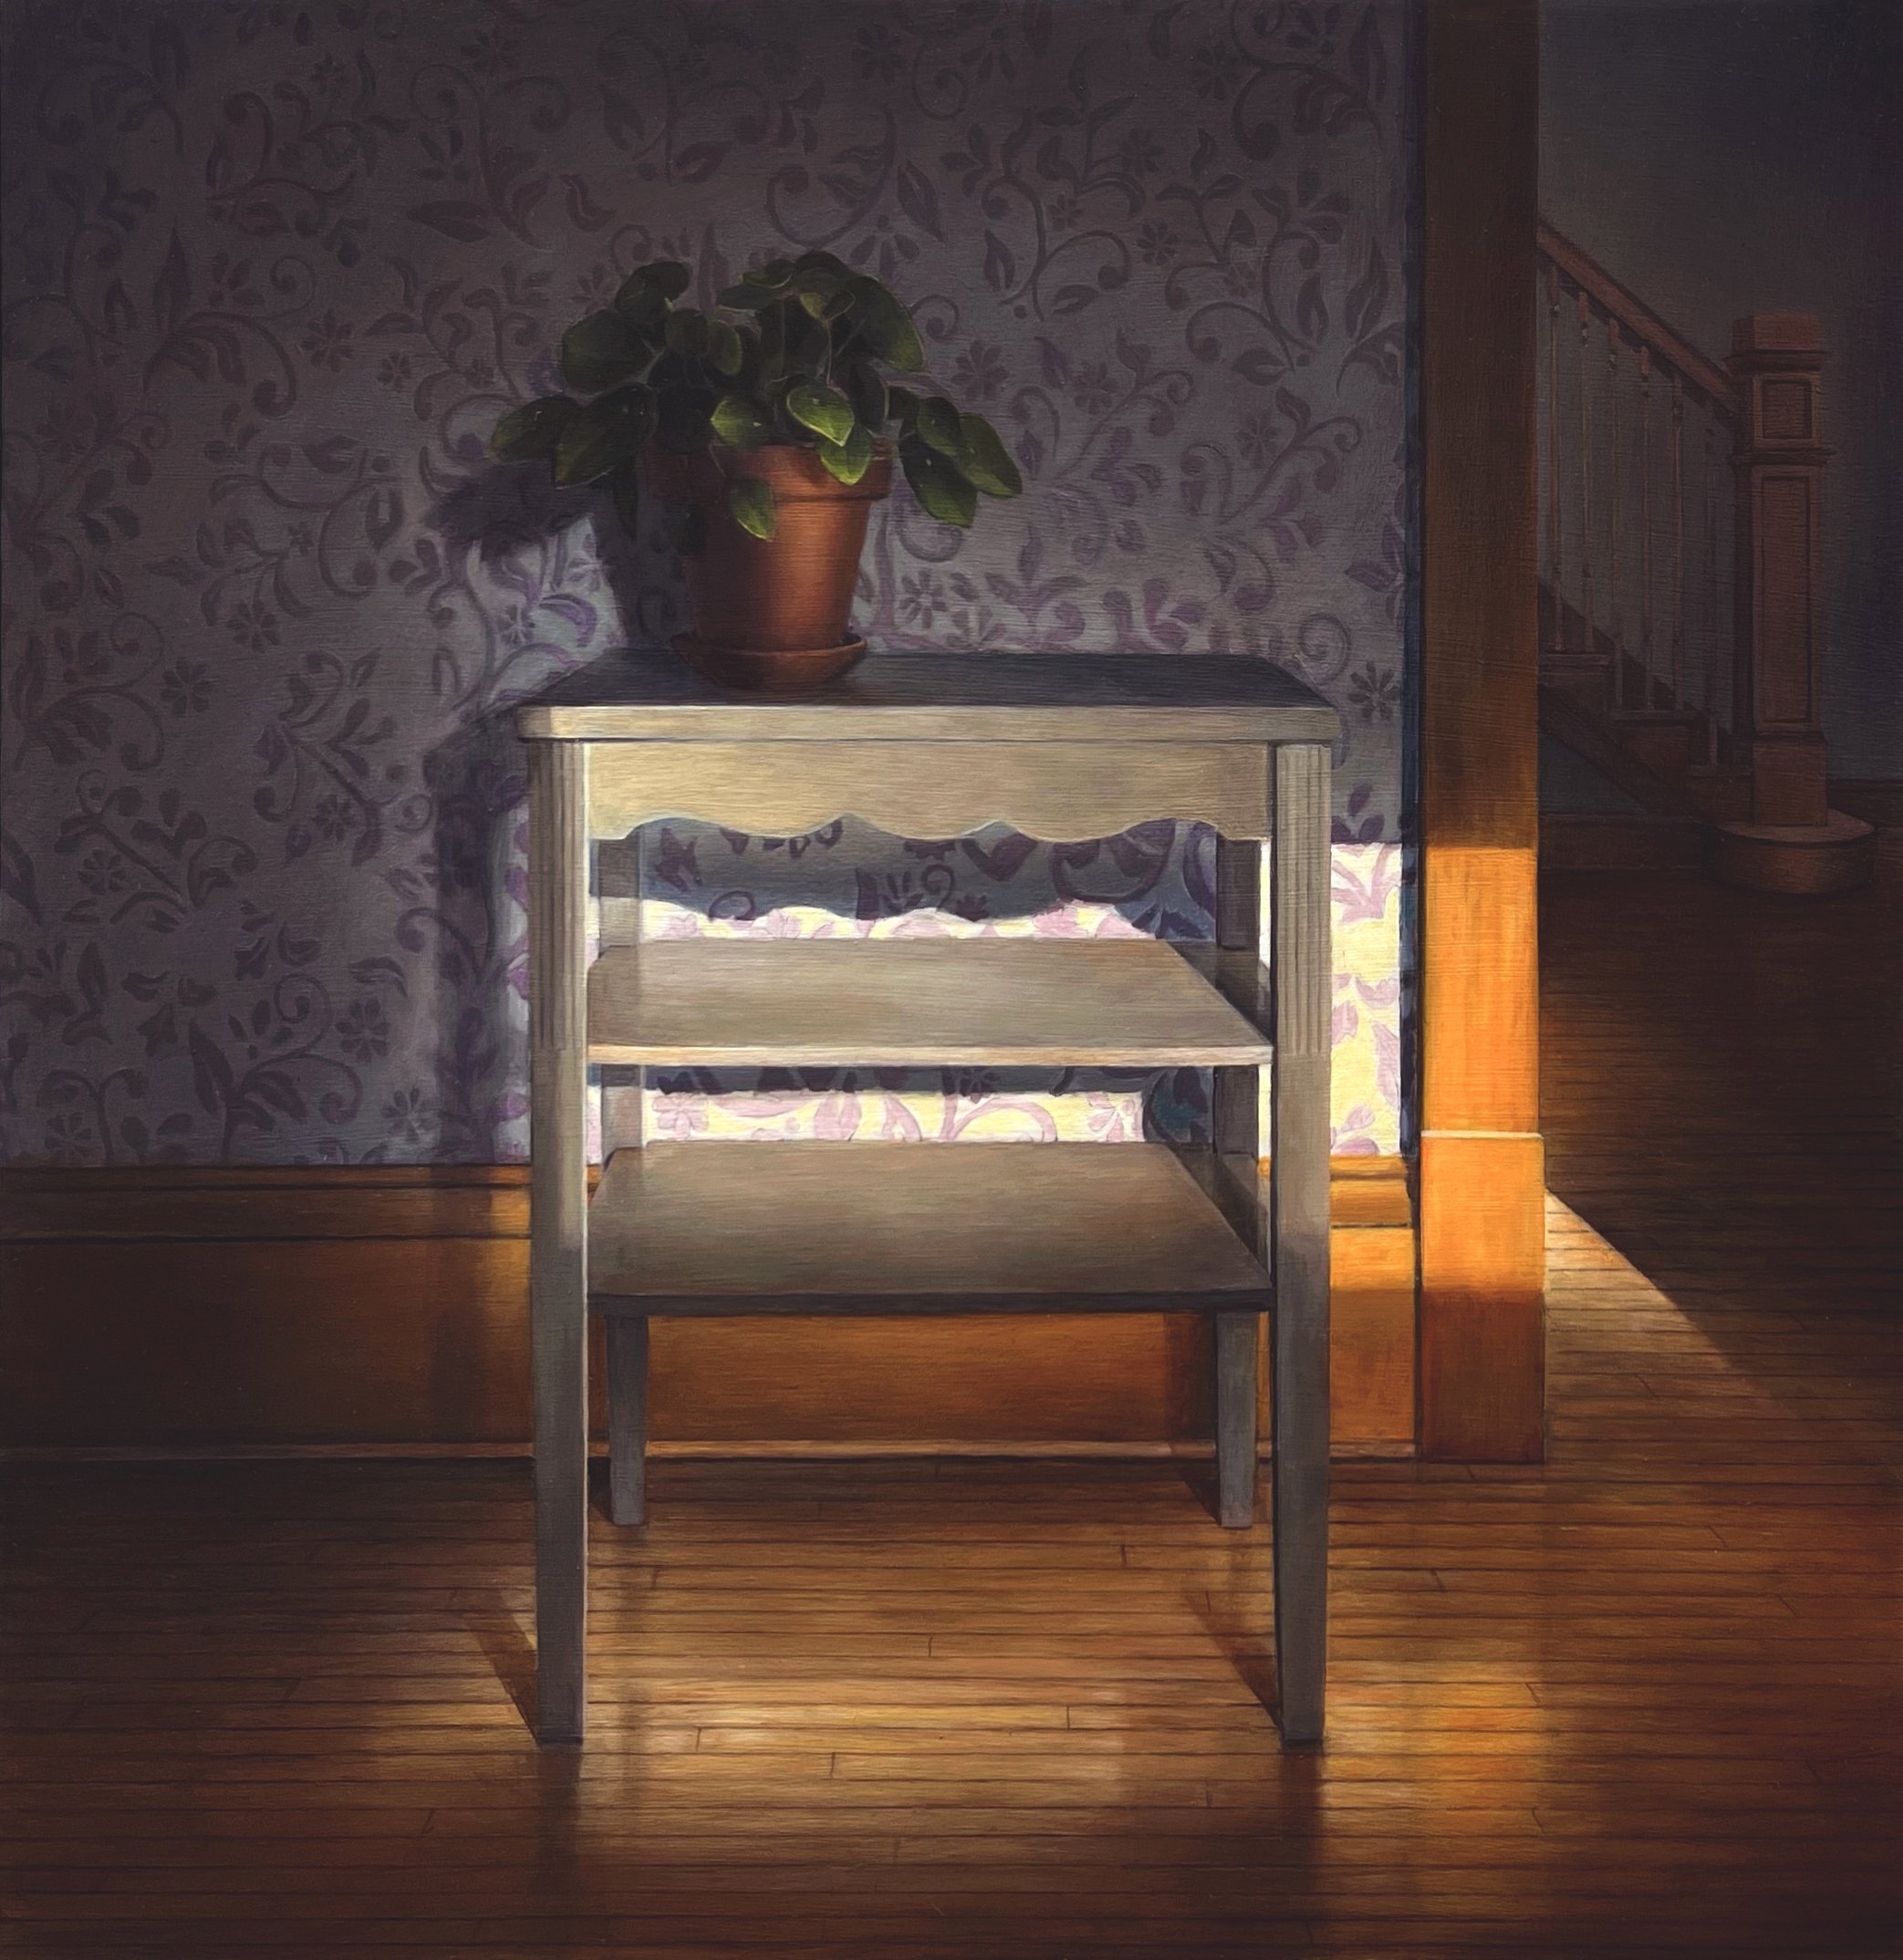   Table with Plant in Window Light   2024  Oil on linen over panel  16 x 16 inches   